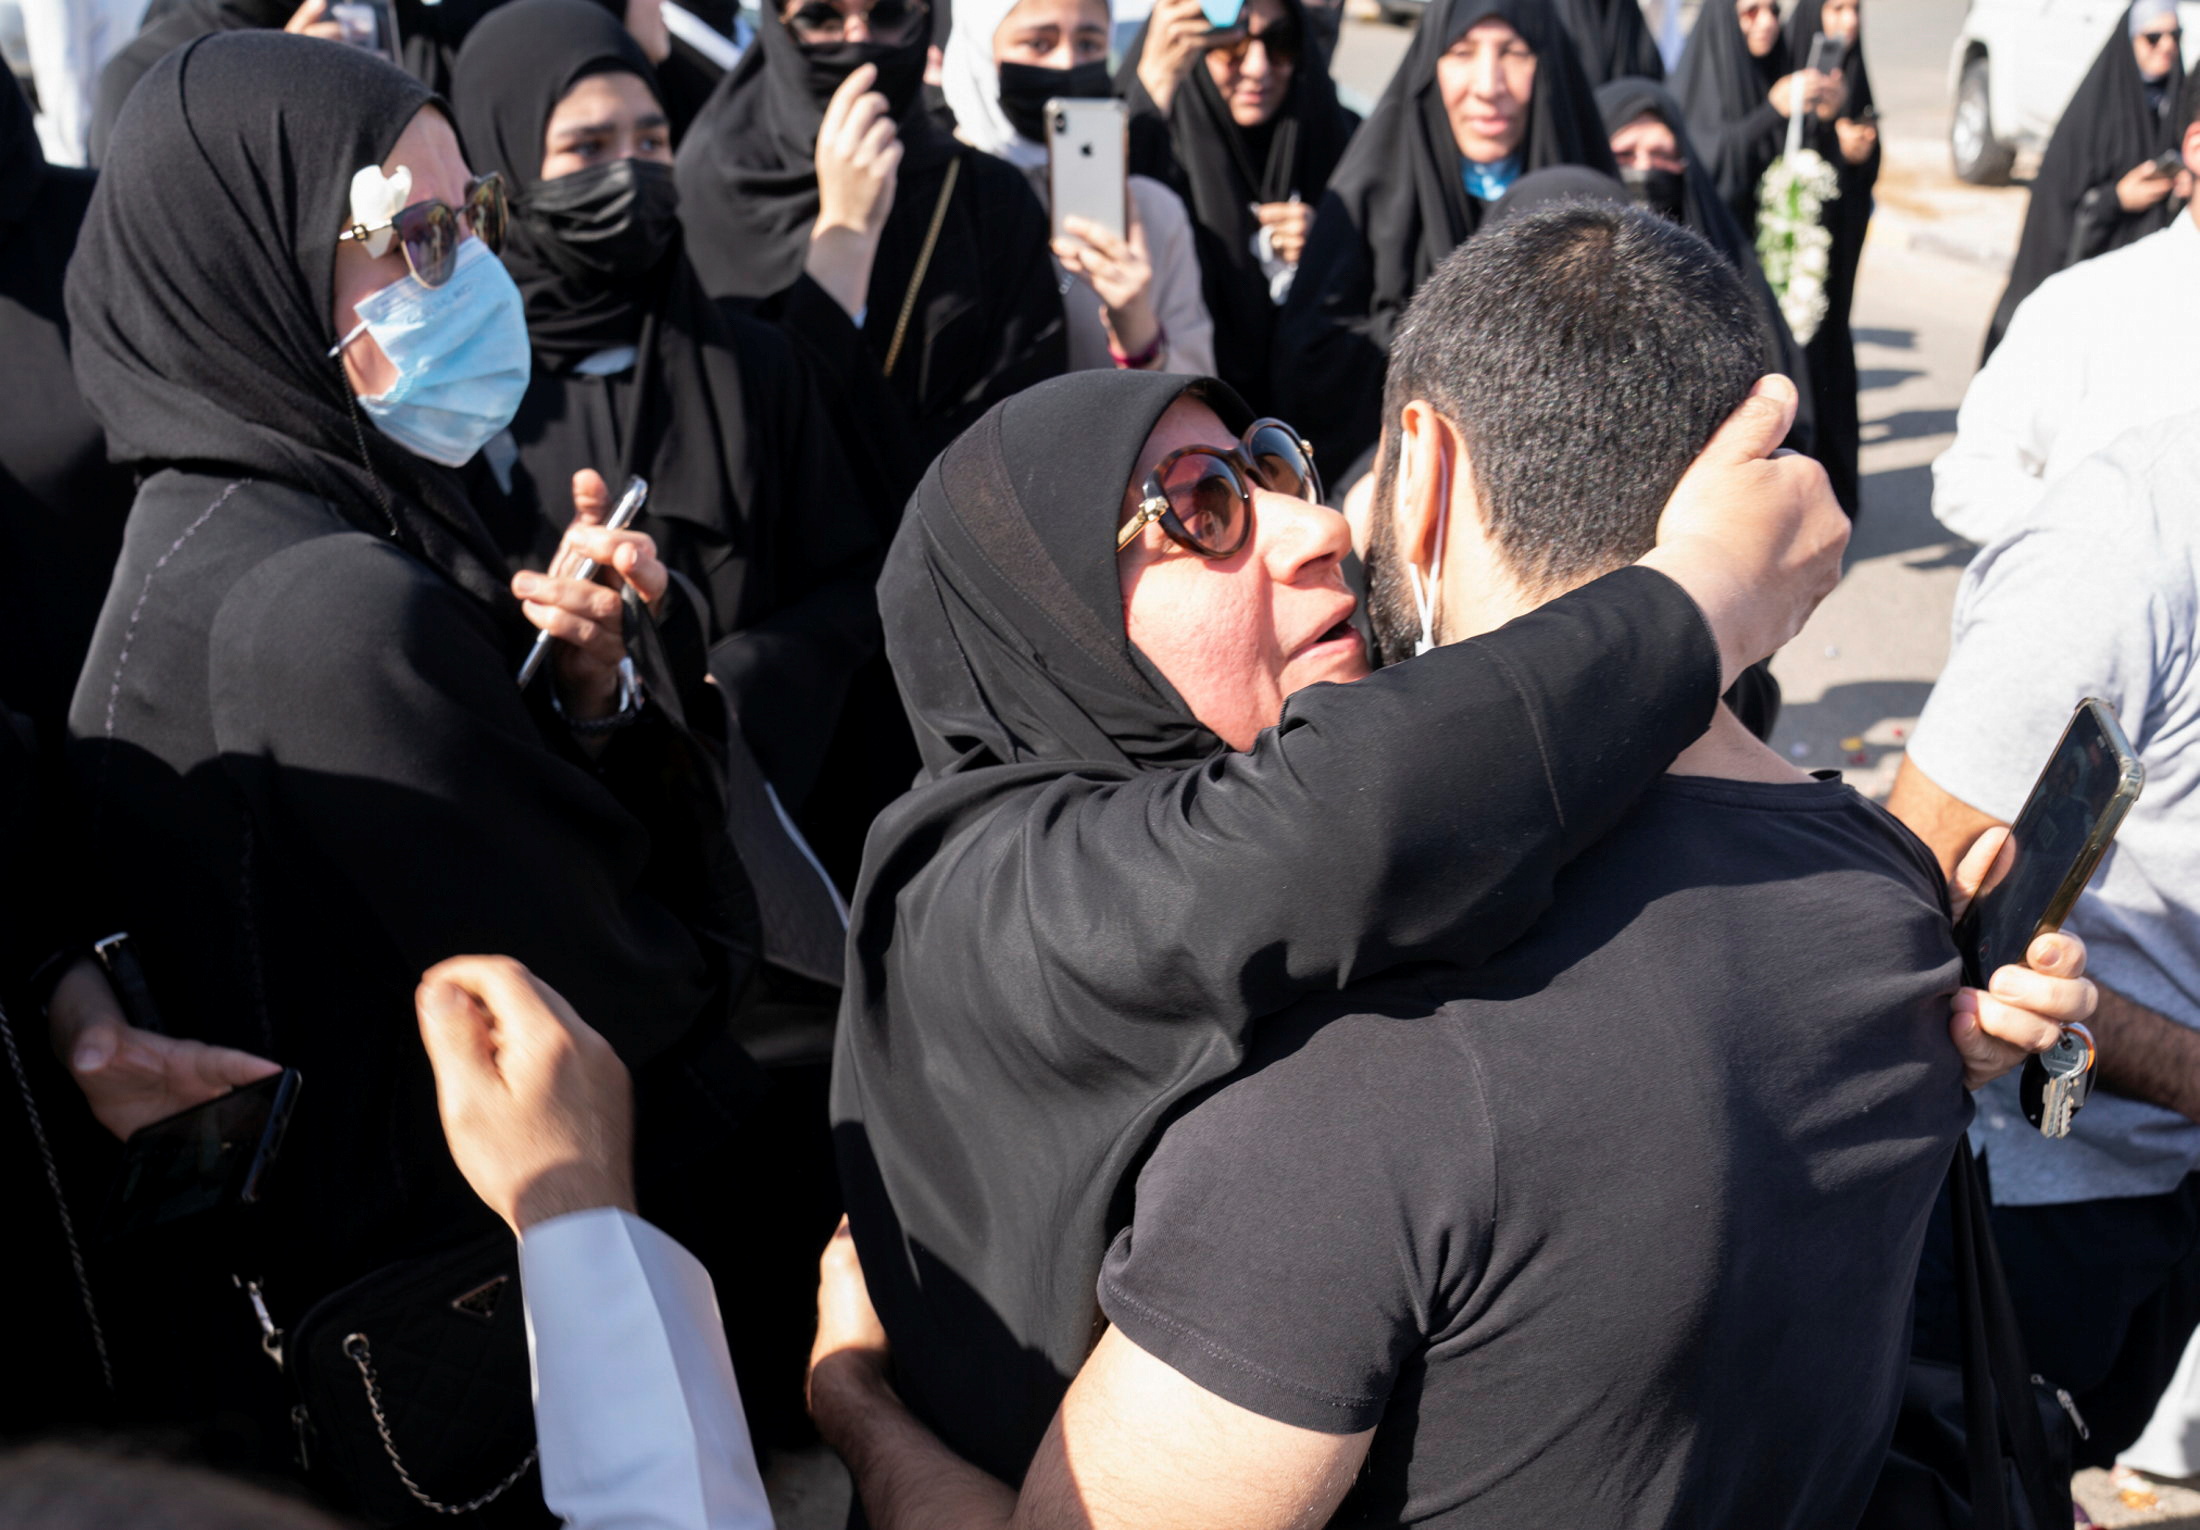 A Kuwaiti political prisoner, is kissed by his mother after he was released in Kuwait, November 14, 2021. REUTERS/Stephanie McGehee